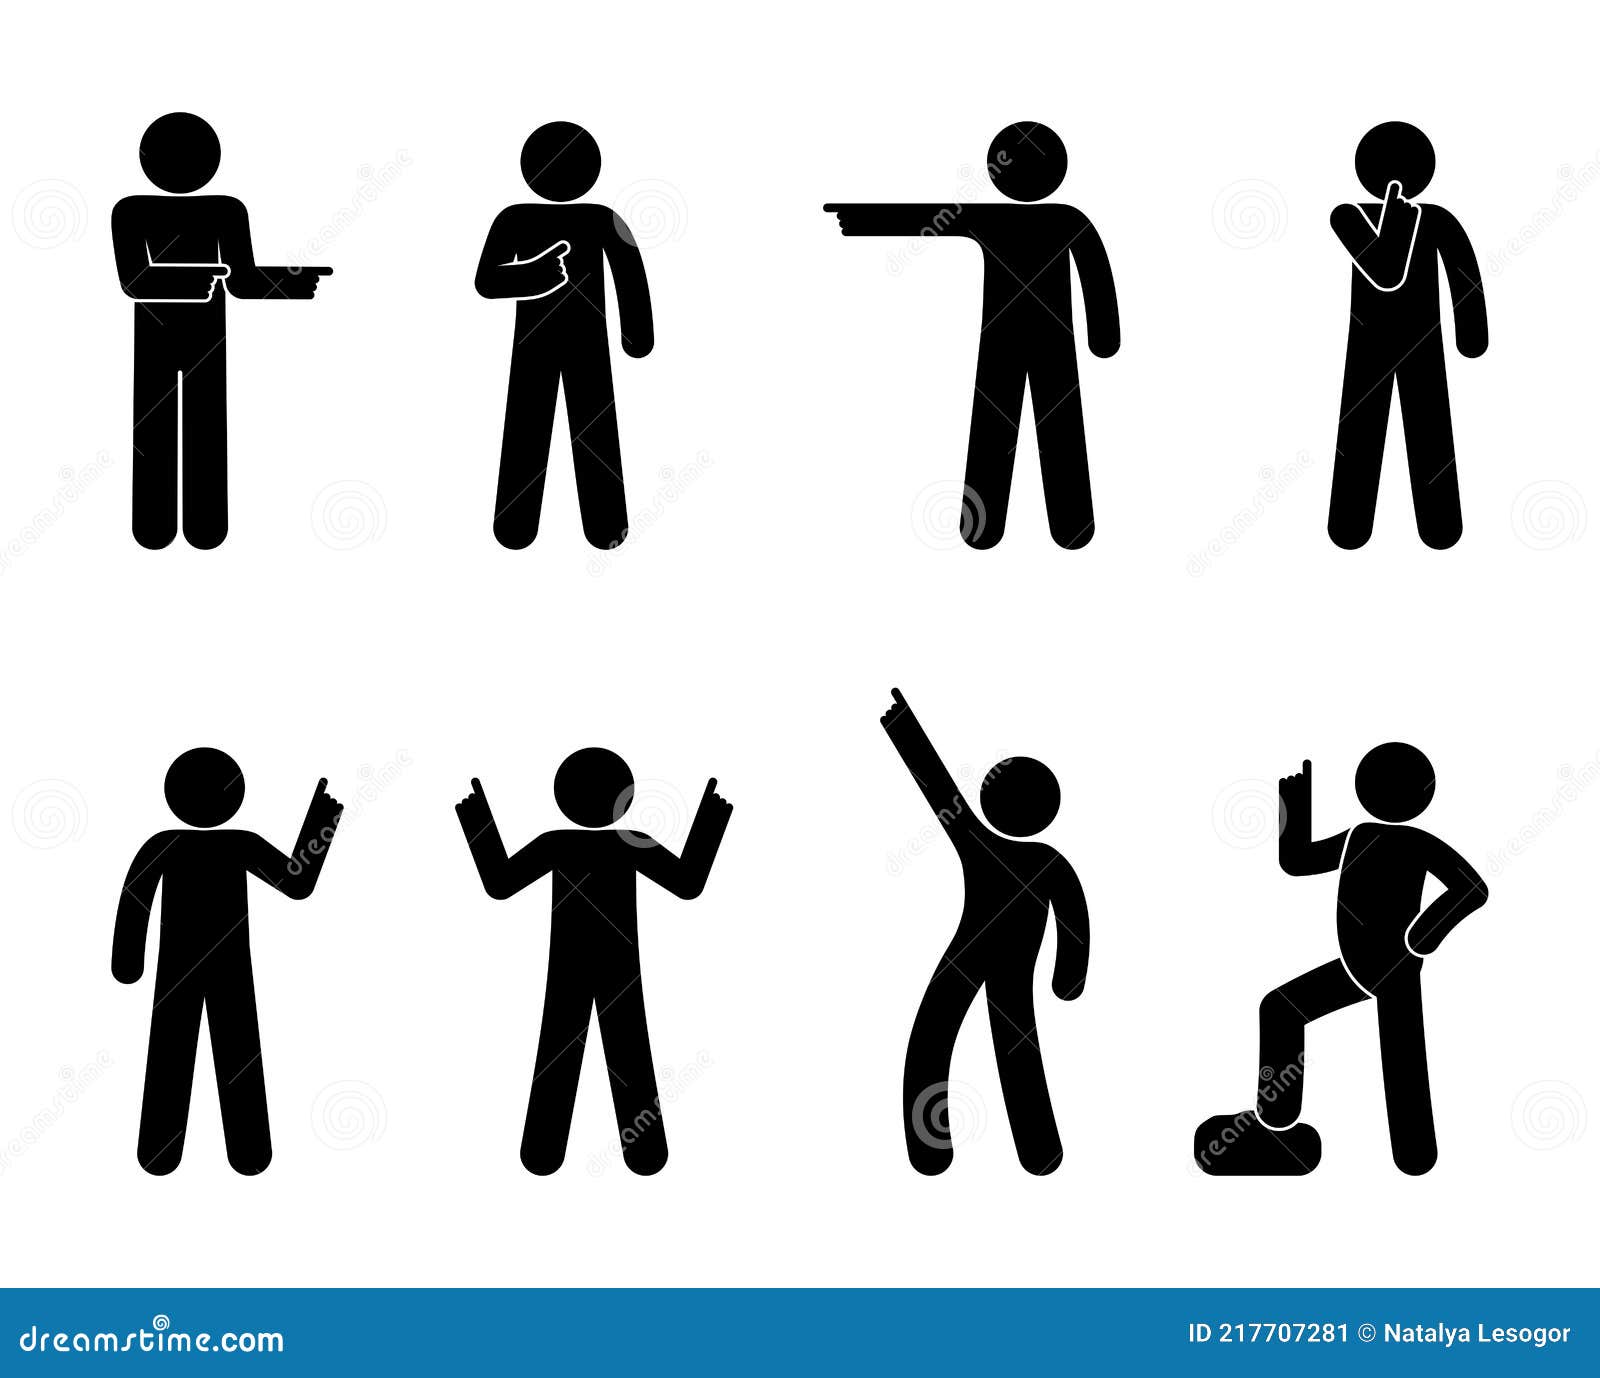 https://thumbs.dreamstime.com/z/man-shows-his-finger-gesture-indicates-direction-icon-stick-figure-human-silhouette-set-people-various-gestures-hands-217707281.jpg